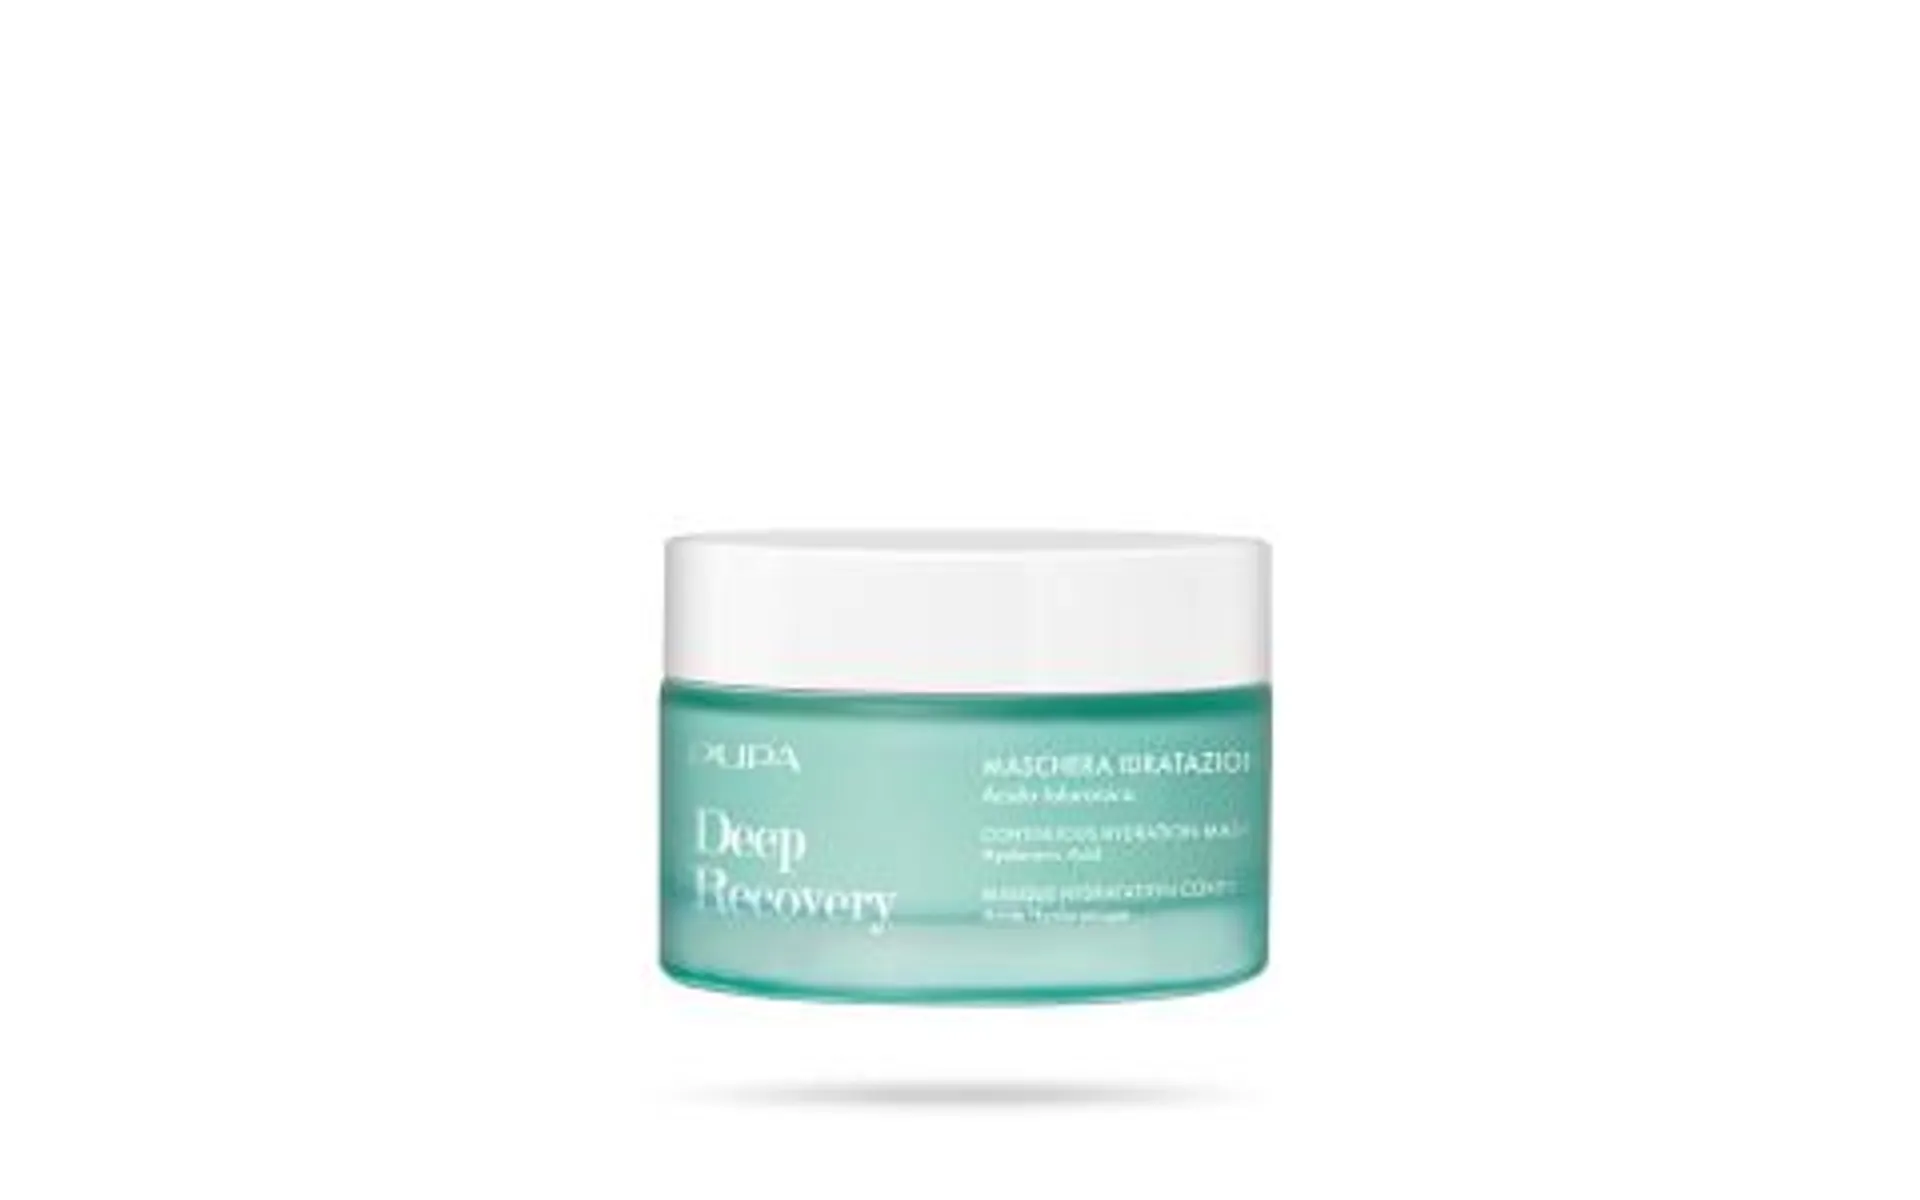 Deep Recovery Continuous Hydration Mask